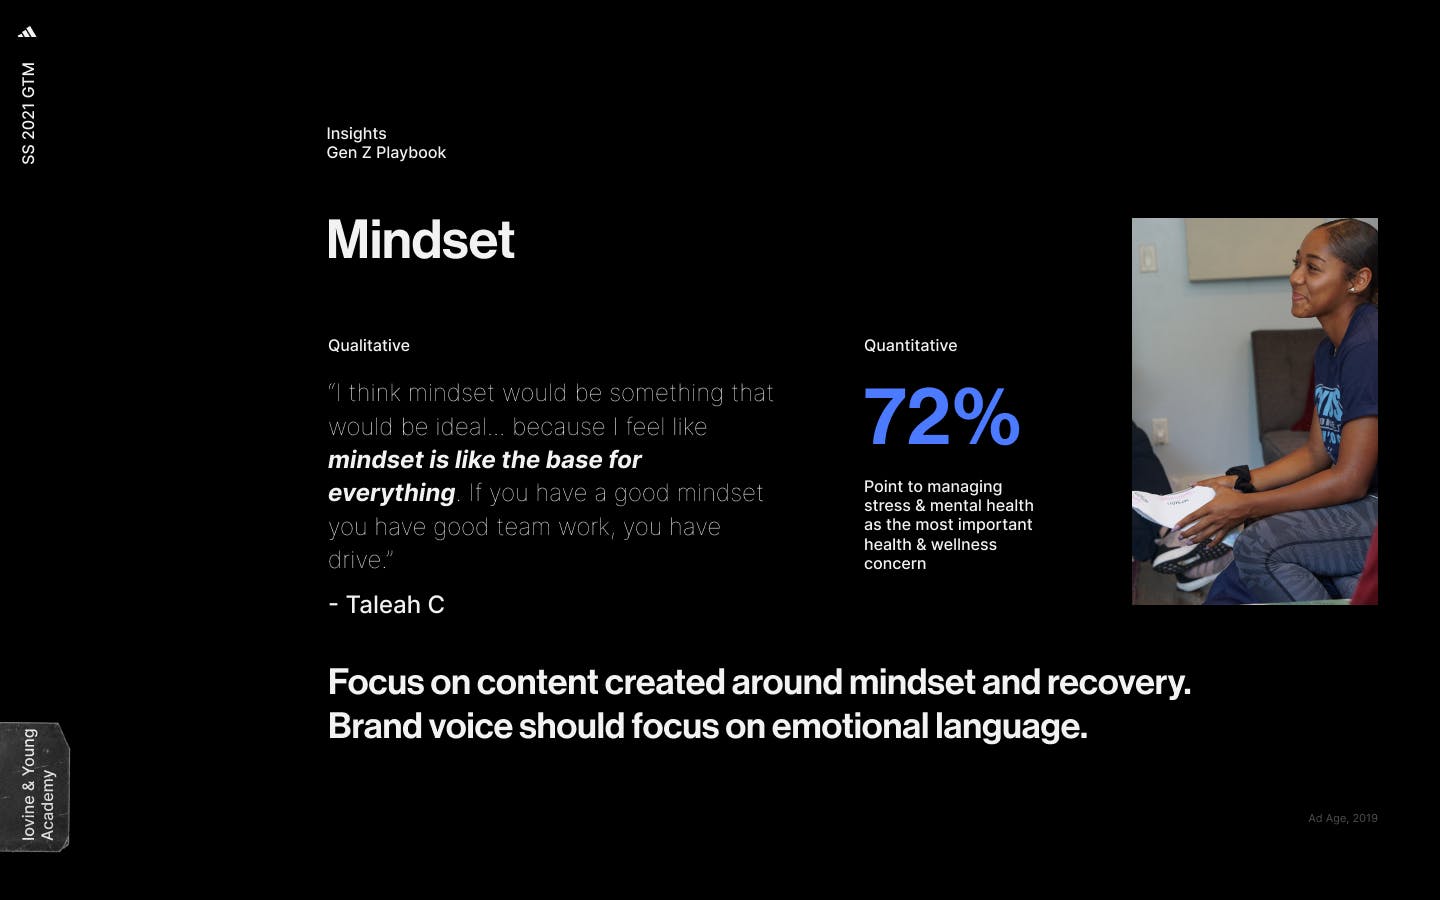 A slide from a marketing pitch with data on mindset